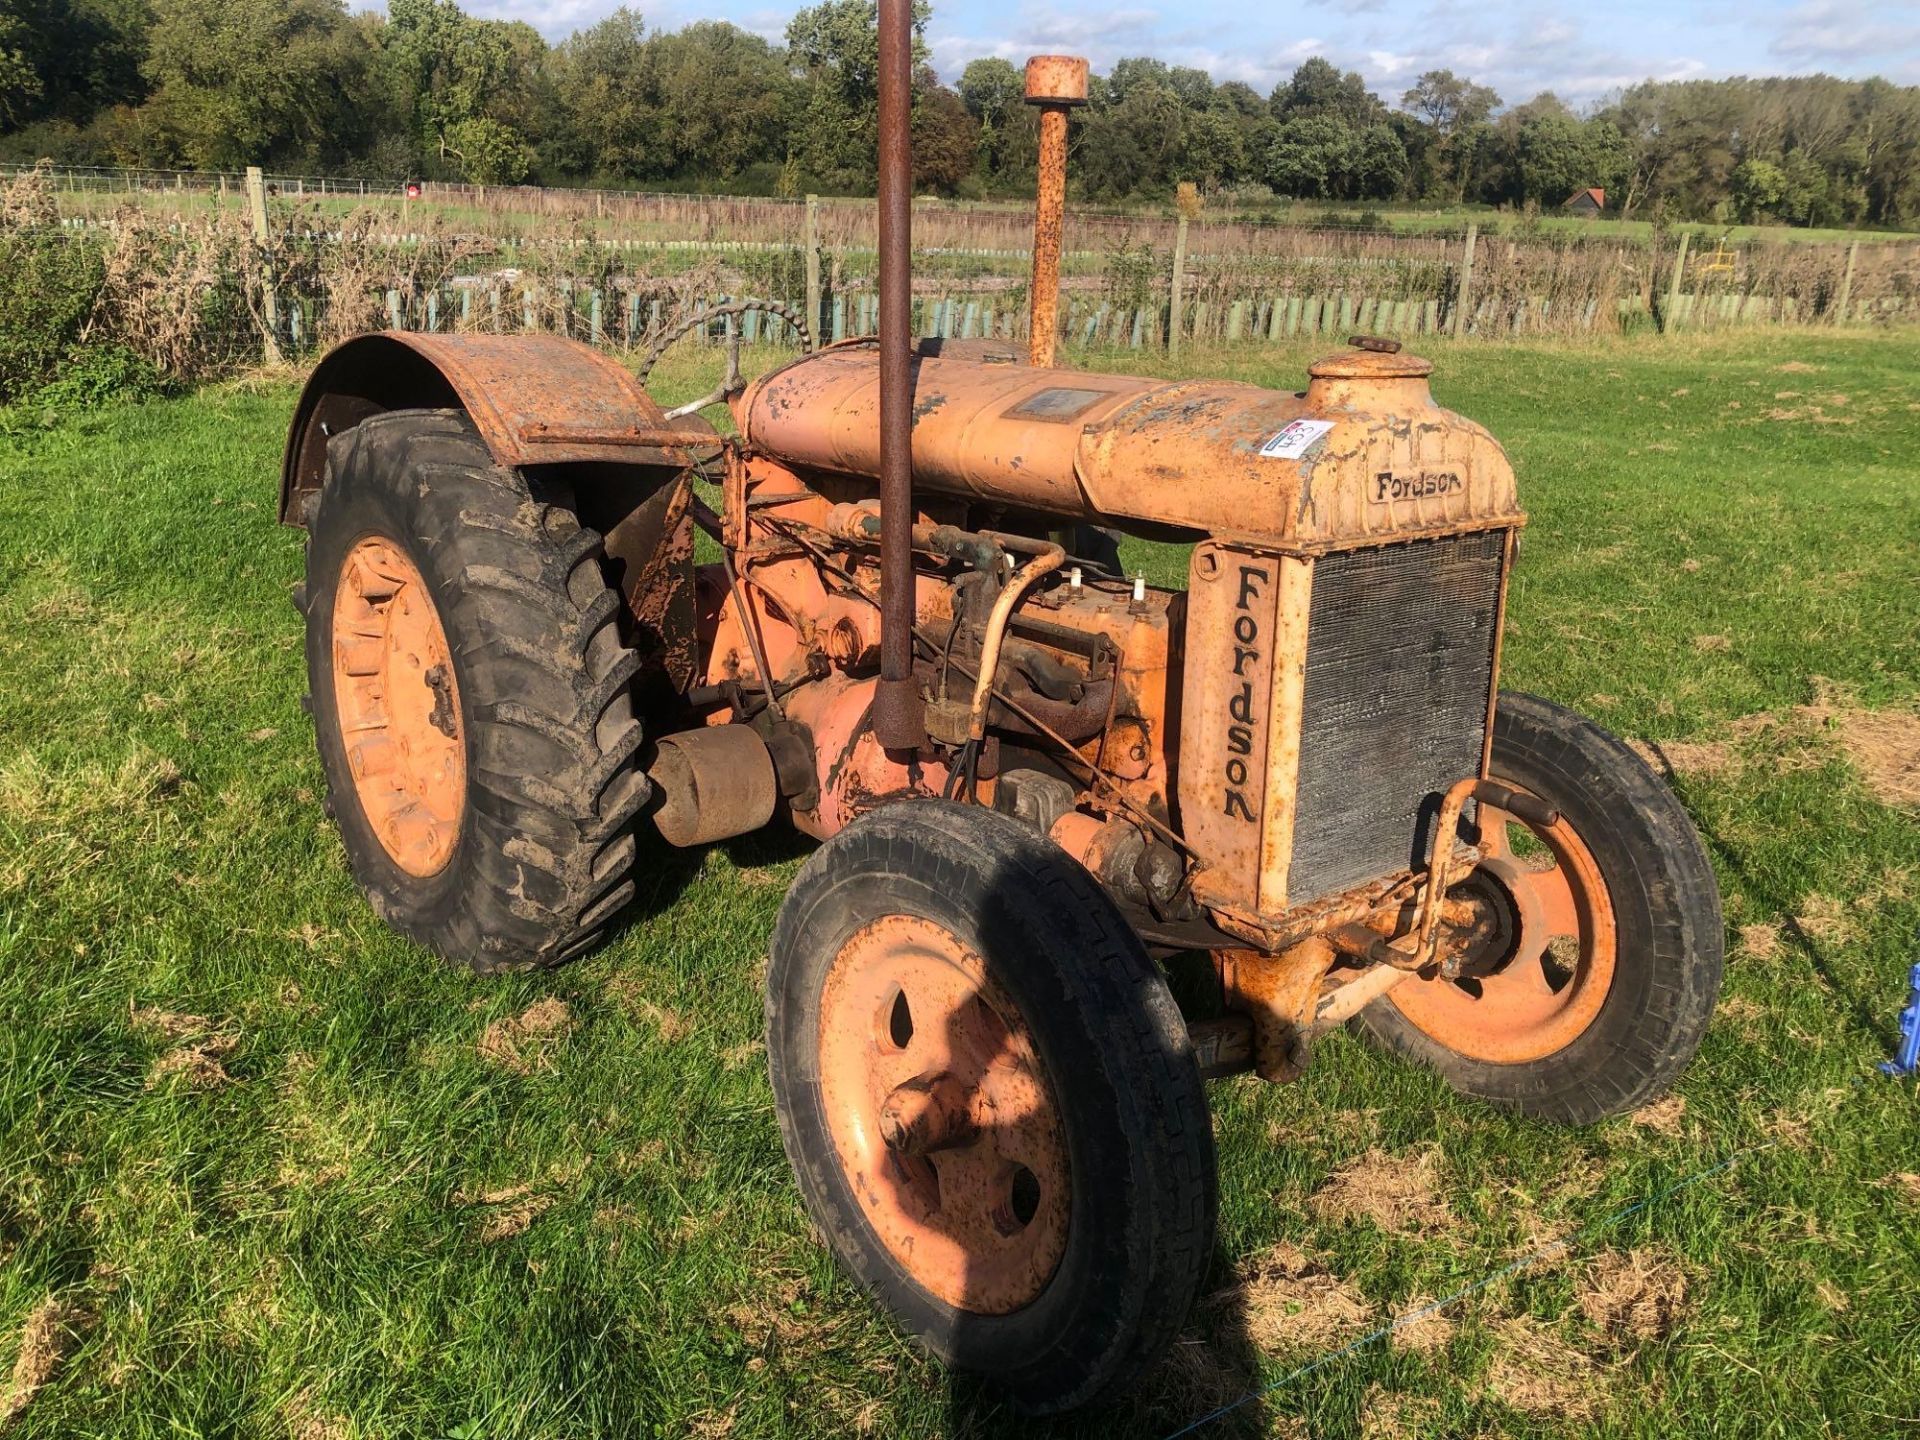 1941 Fordson 2wd tractor with side belt pulley. No VAT.